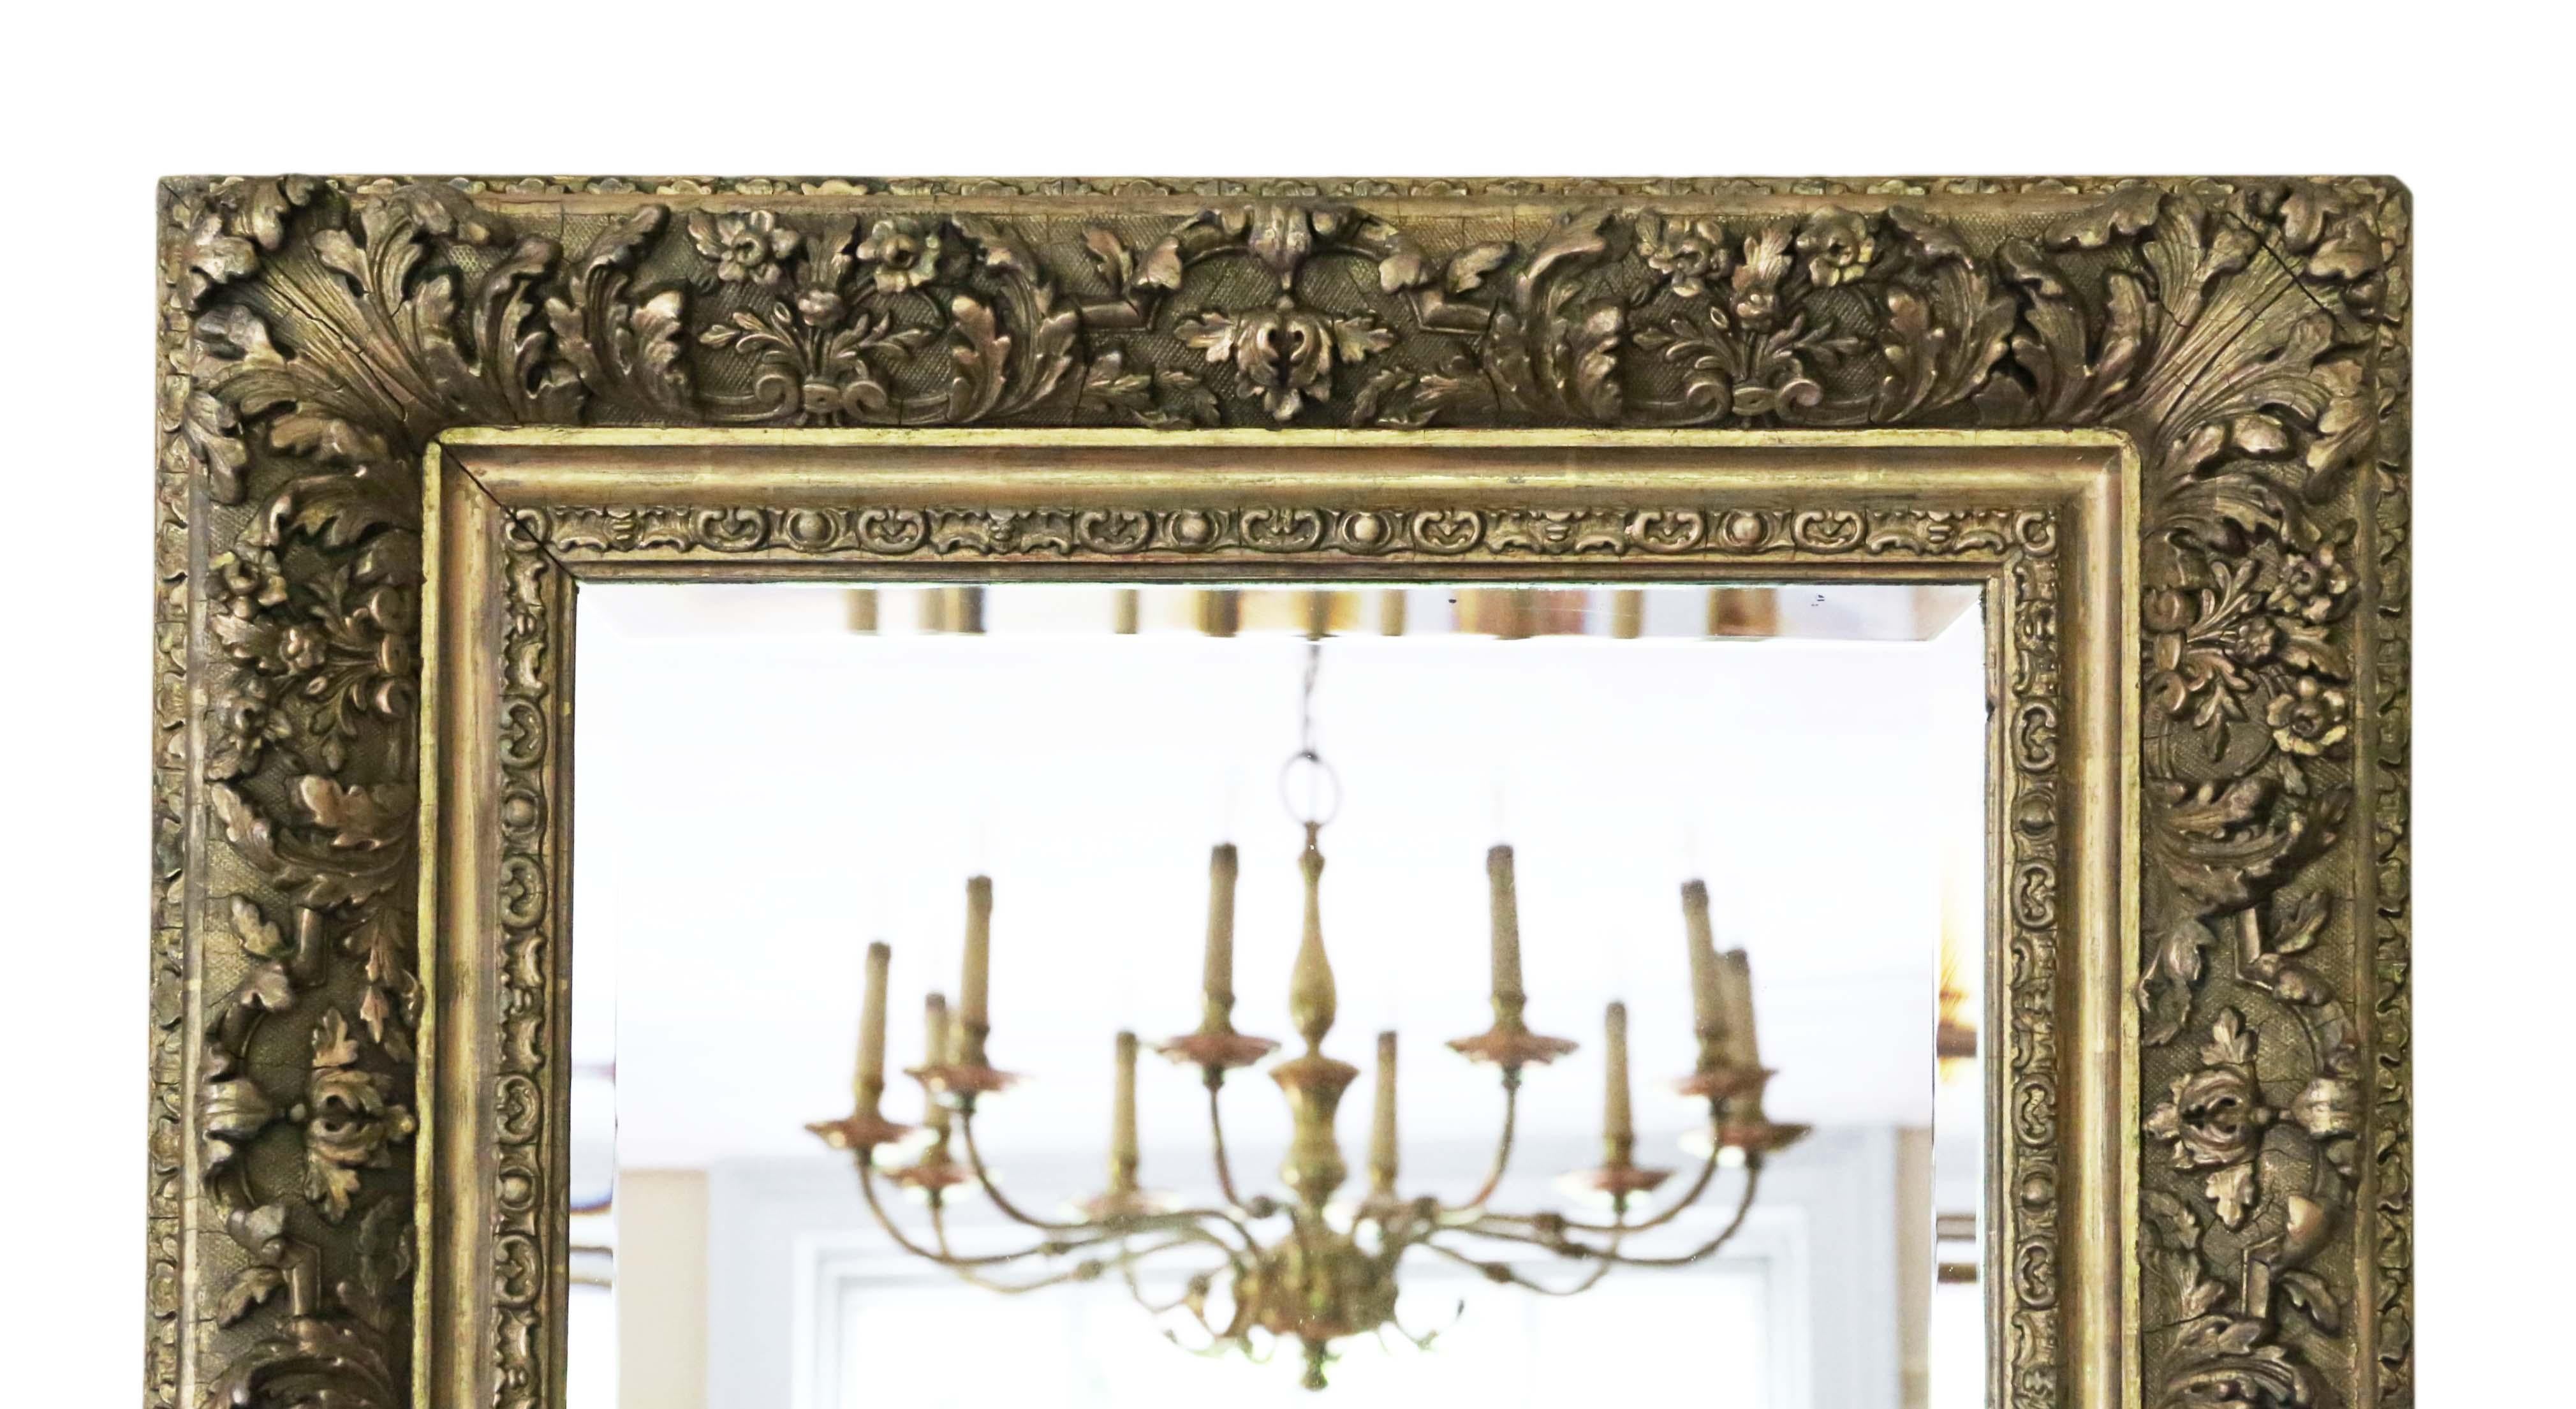 Antique large fine quality gilt 19th century overmantle / wall mirror. Lovely charm and elegance. Could be hung in portrait of landscape.

An impressive and rare find, that would look amazing in the right location. No loose joints.

The later